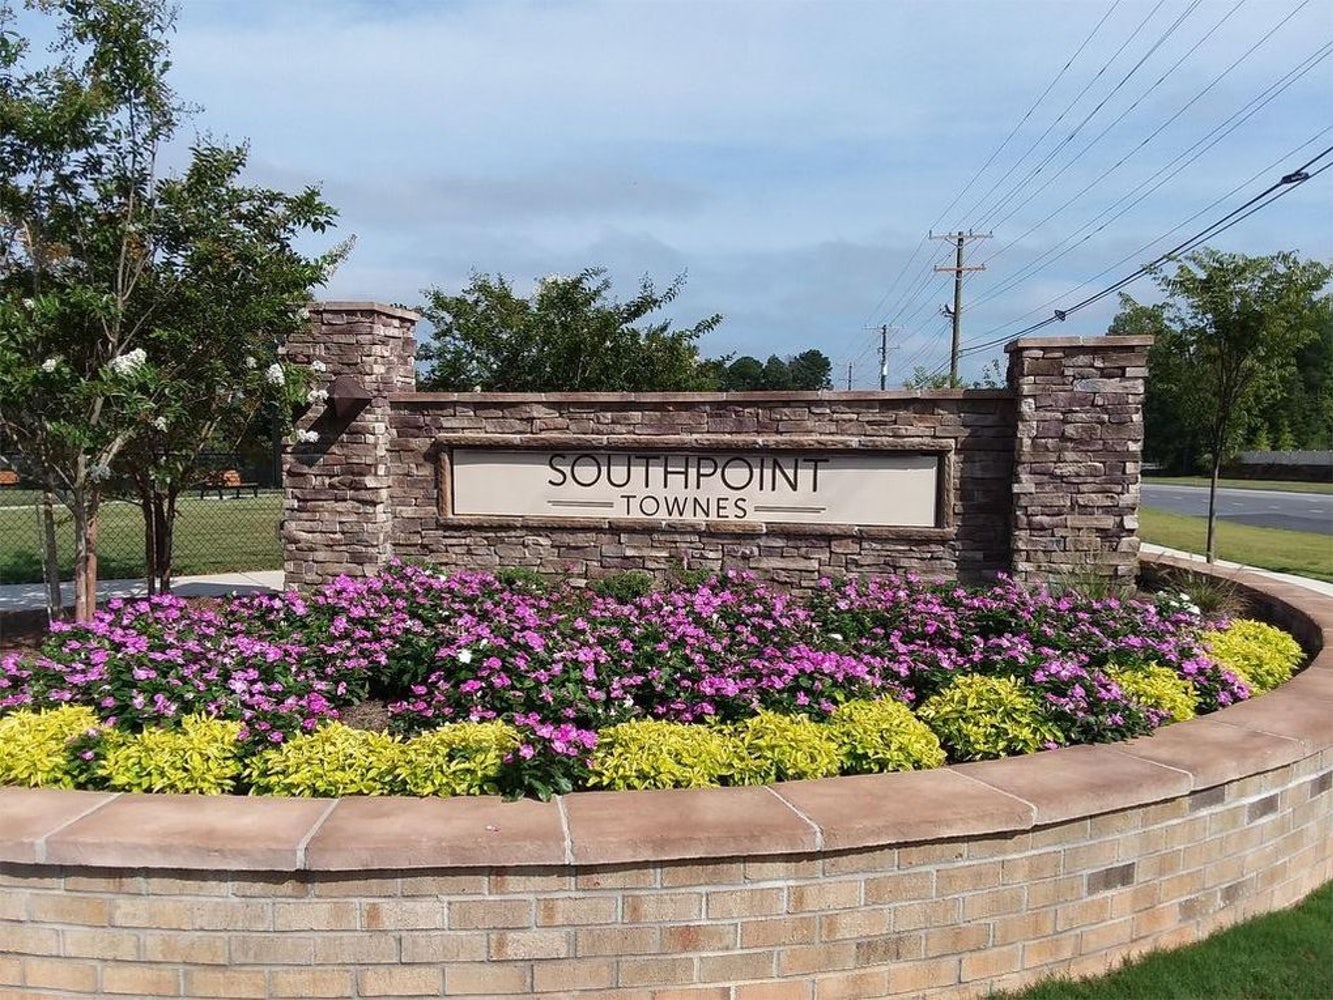 Southpoint Townes homes